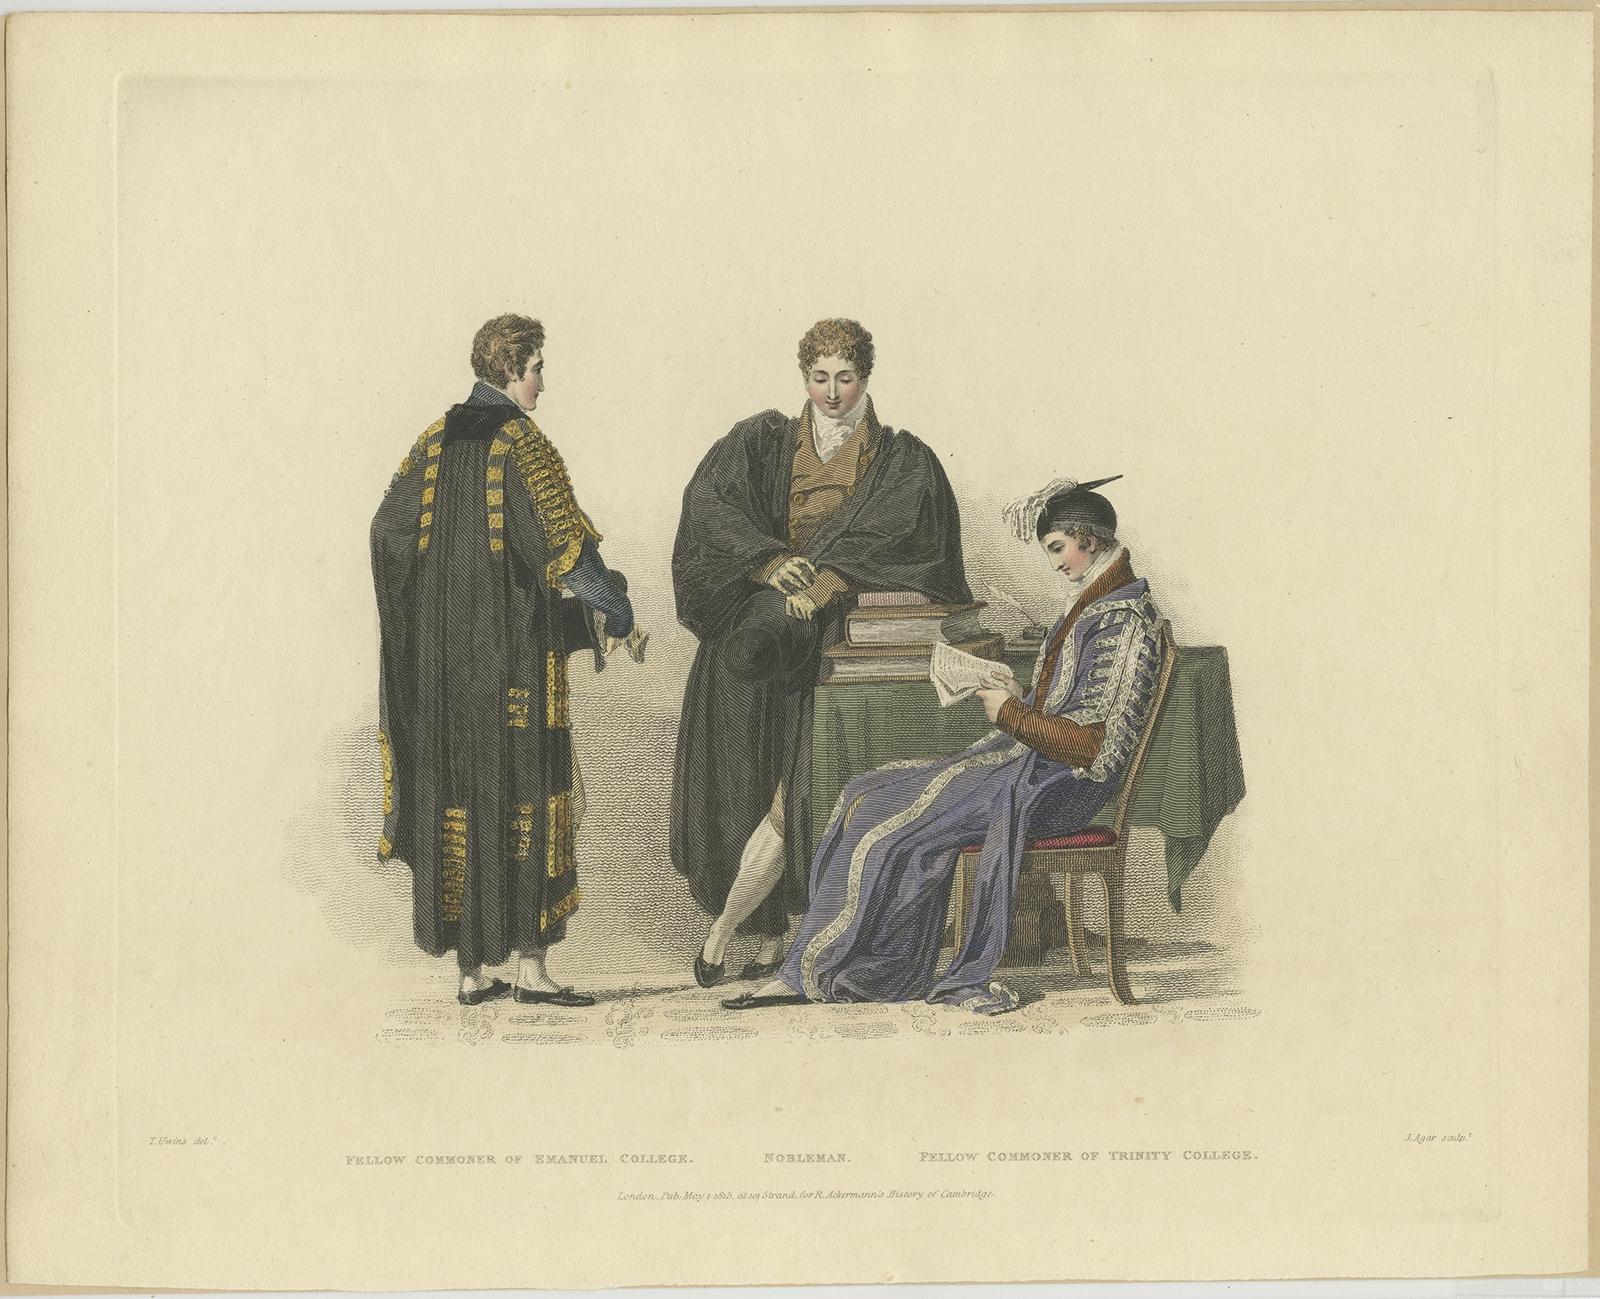 Antique print titled 'Fellow Commoner of Emanuel College - Nobleman - Fellow Commoner of Trinity College'. Portraits of a Fellow Commoner of Emanuel, Nobleman, and Fellow Commoner of Trinit. Made after a drawing by Thomas Uwins. This print